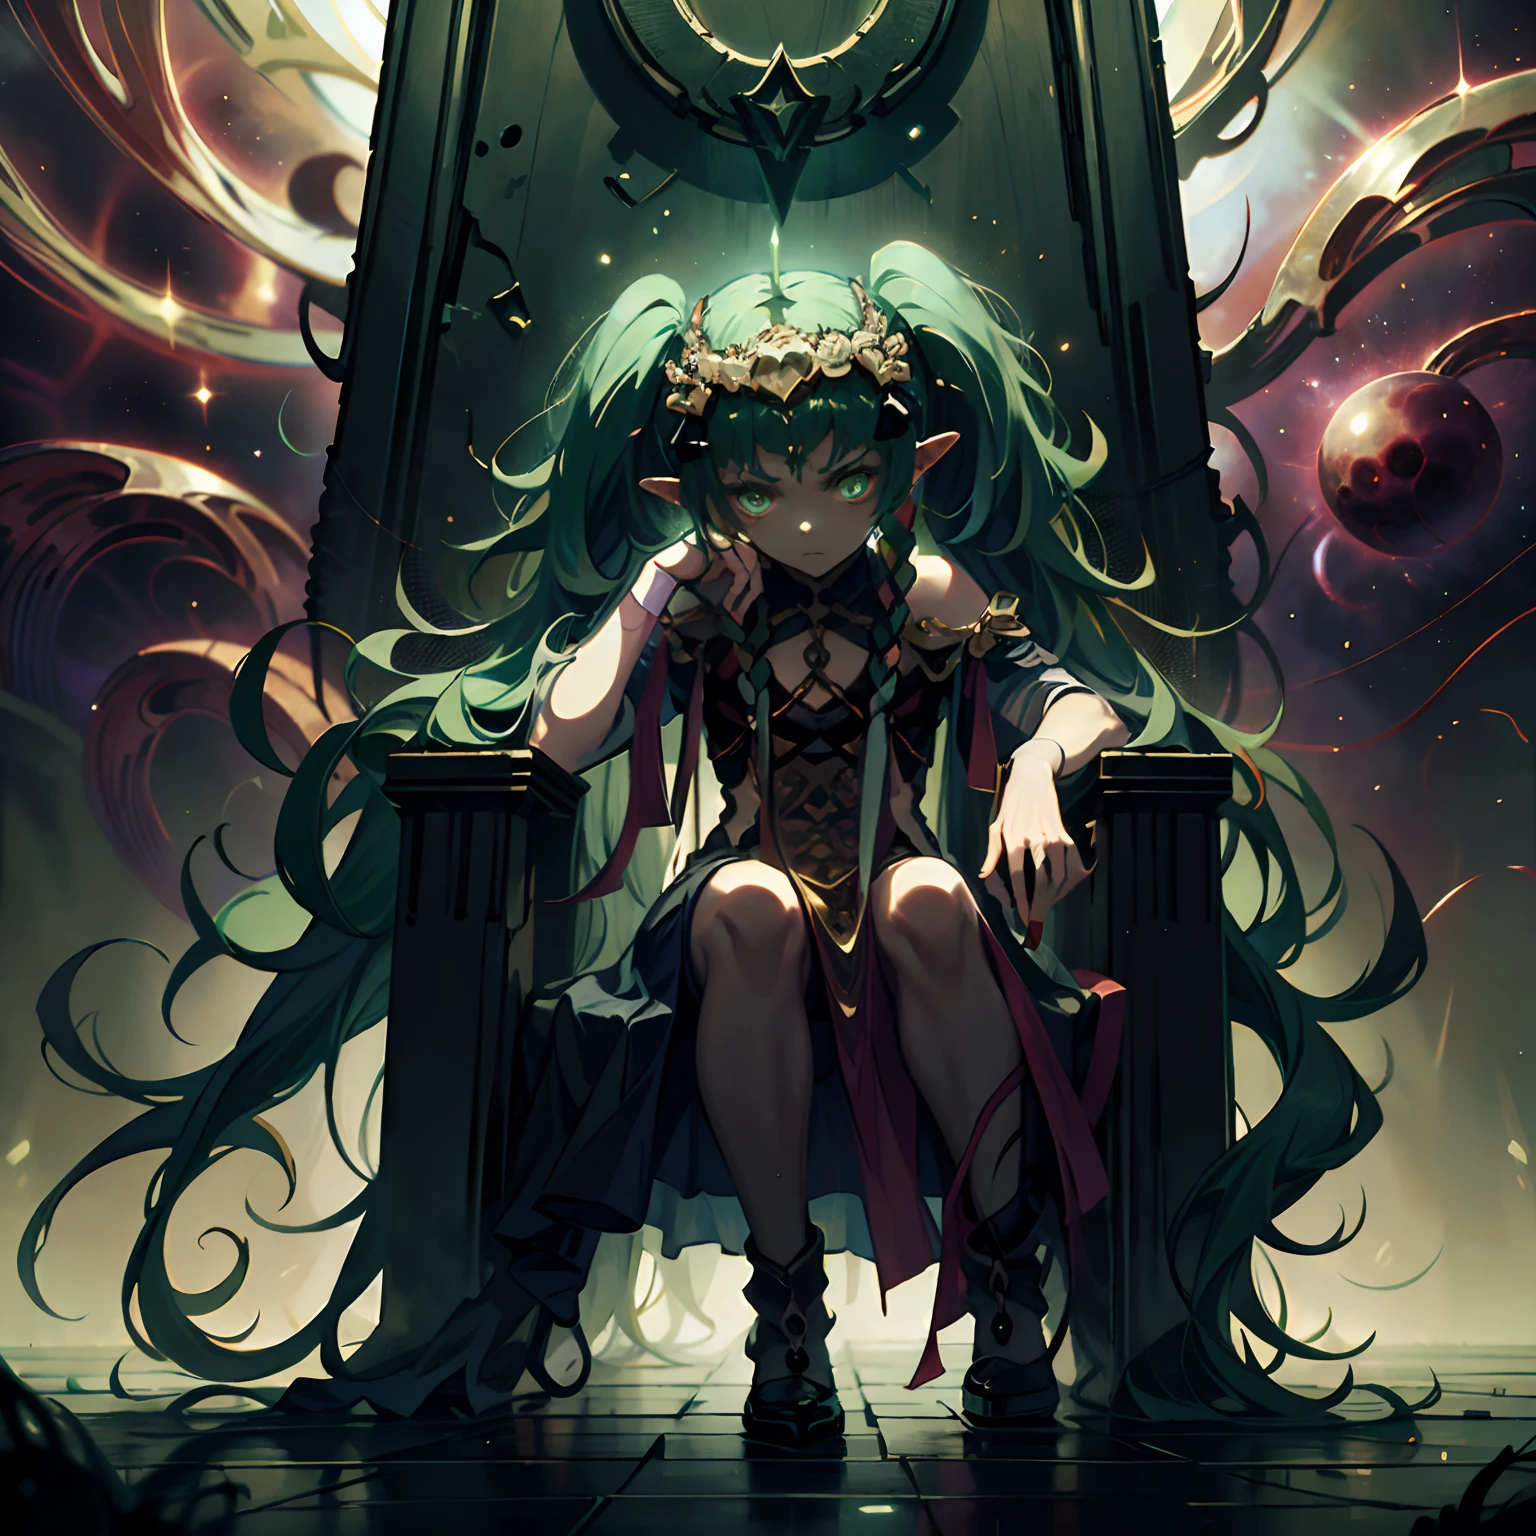 Sothis, Green twintails, serious face, eldritch, dark glow, sitting on a stome throne, glowing eyes, eldritchtech
cosmic, dark energy